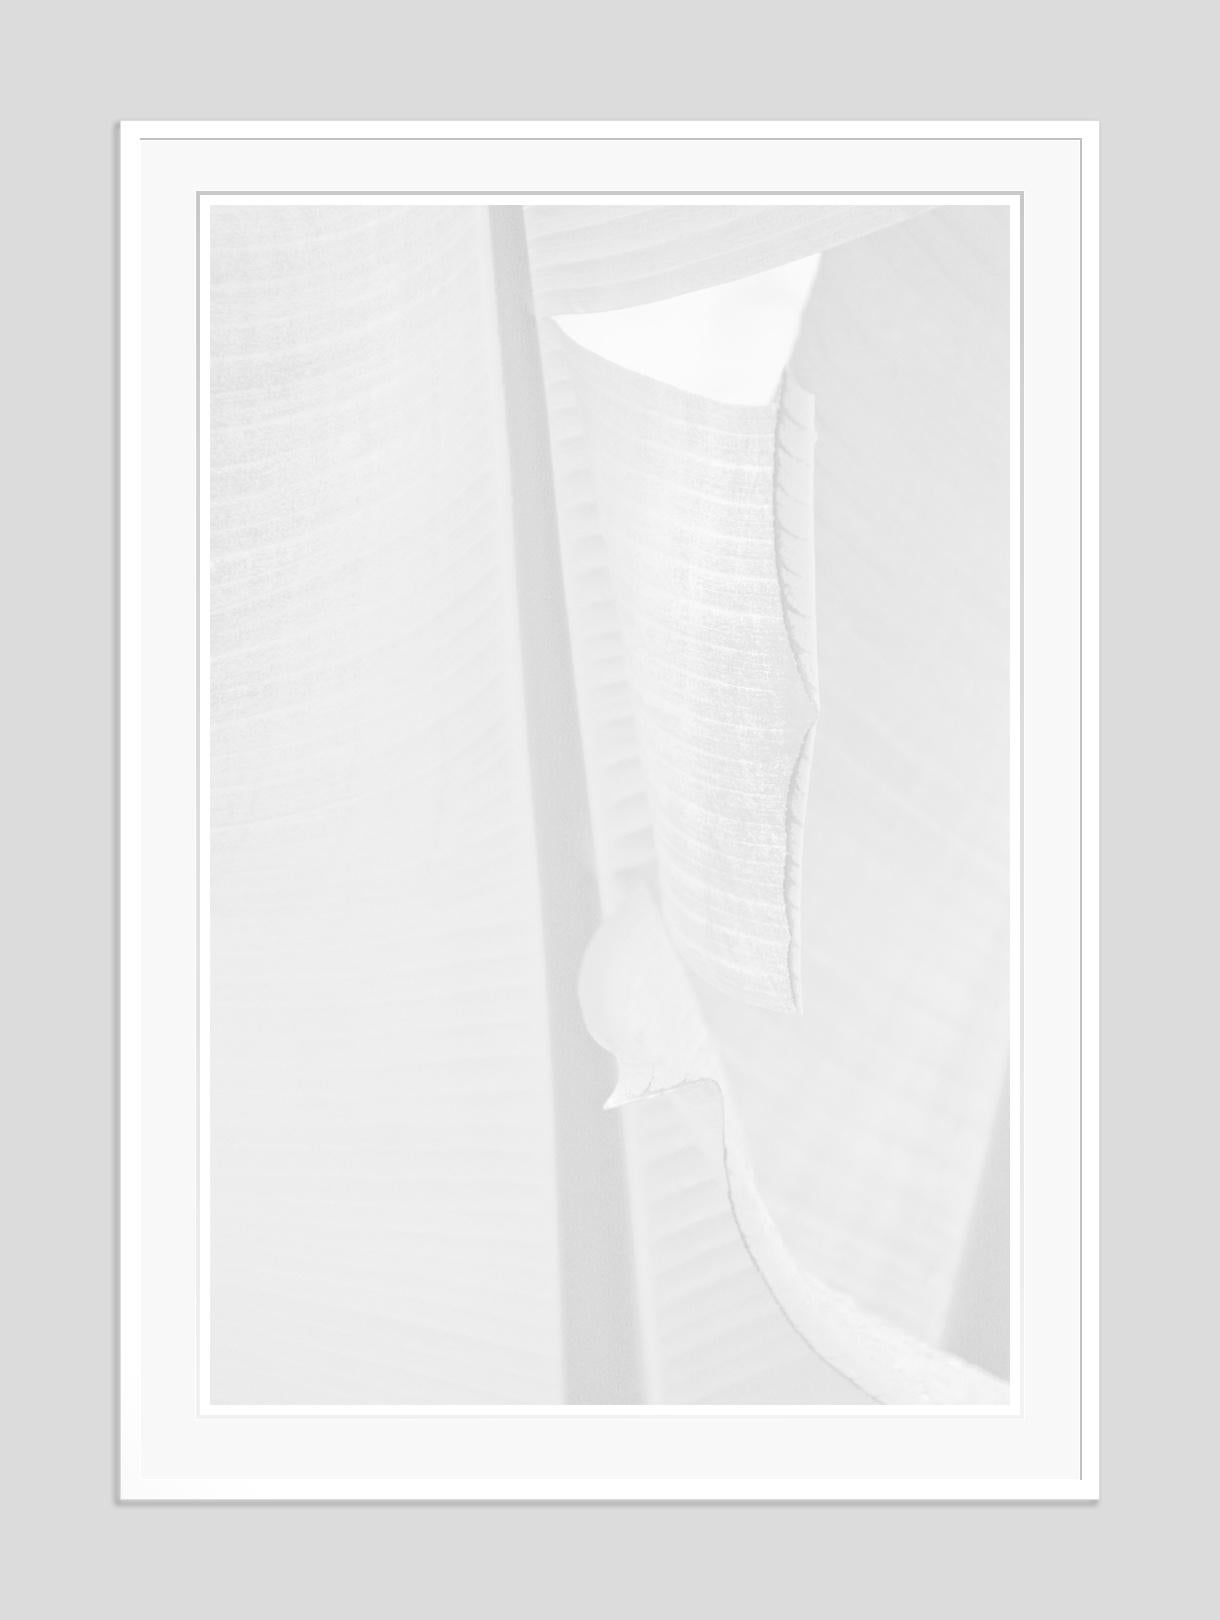 White Leaf -  Oversize Signed Limited Edition Print  - Photograph by Stuart Möller